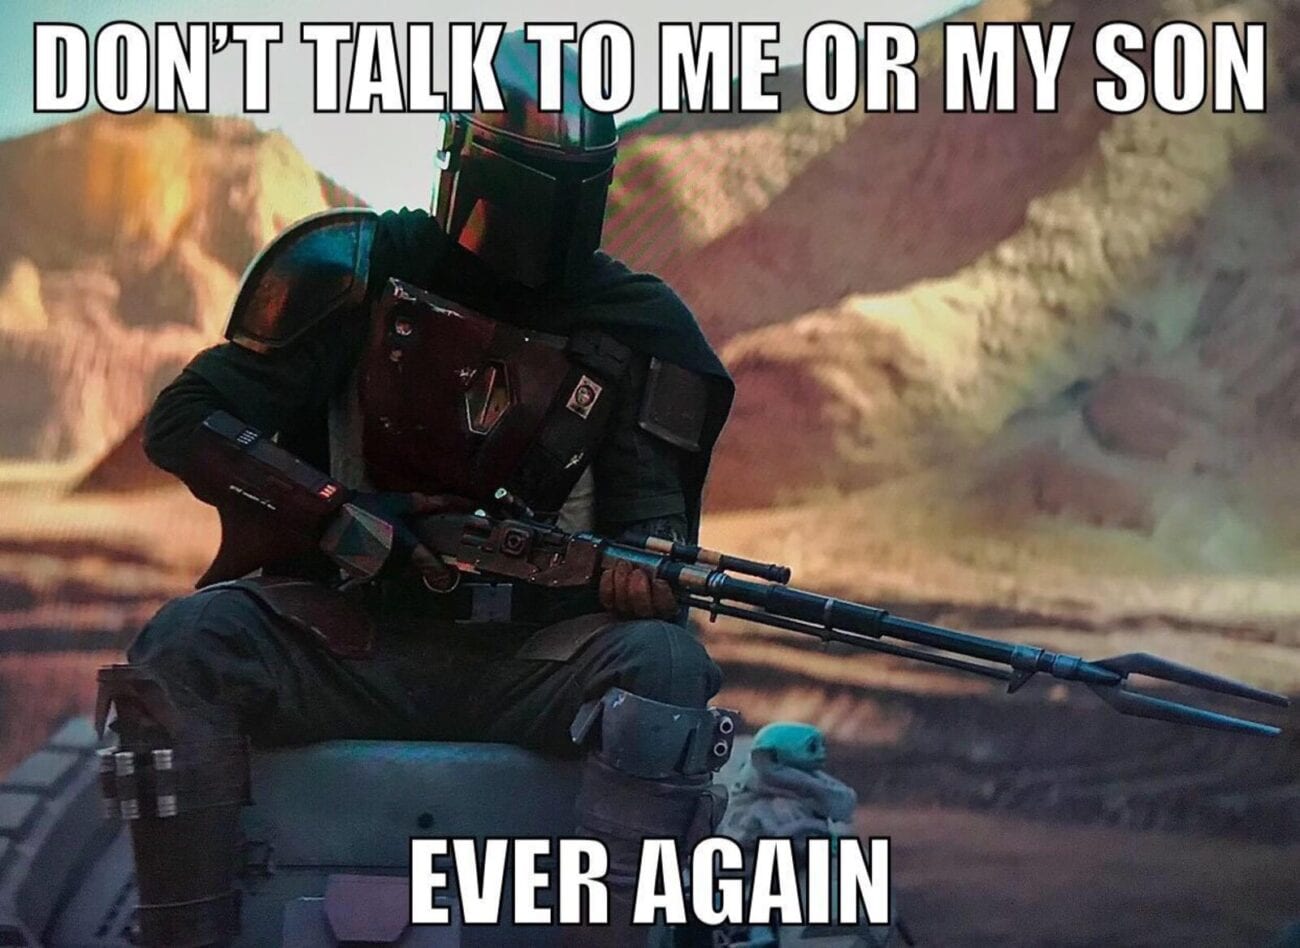 'The Mandalorian' is set to return to Disney+ and we can’t be more excited. Here are all of the newest memes fans have made in celebration of season 2.